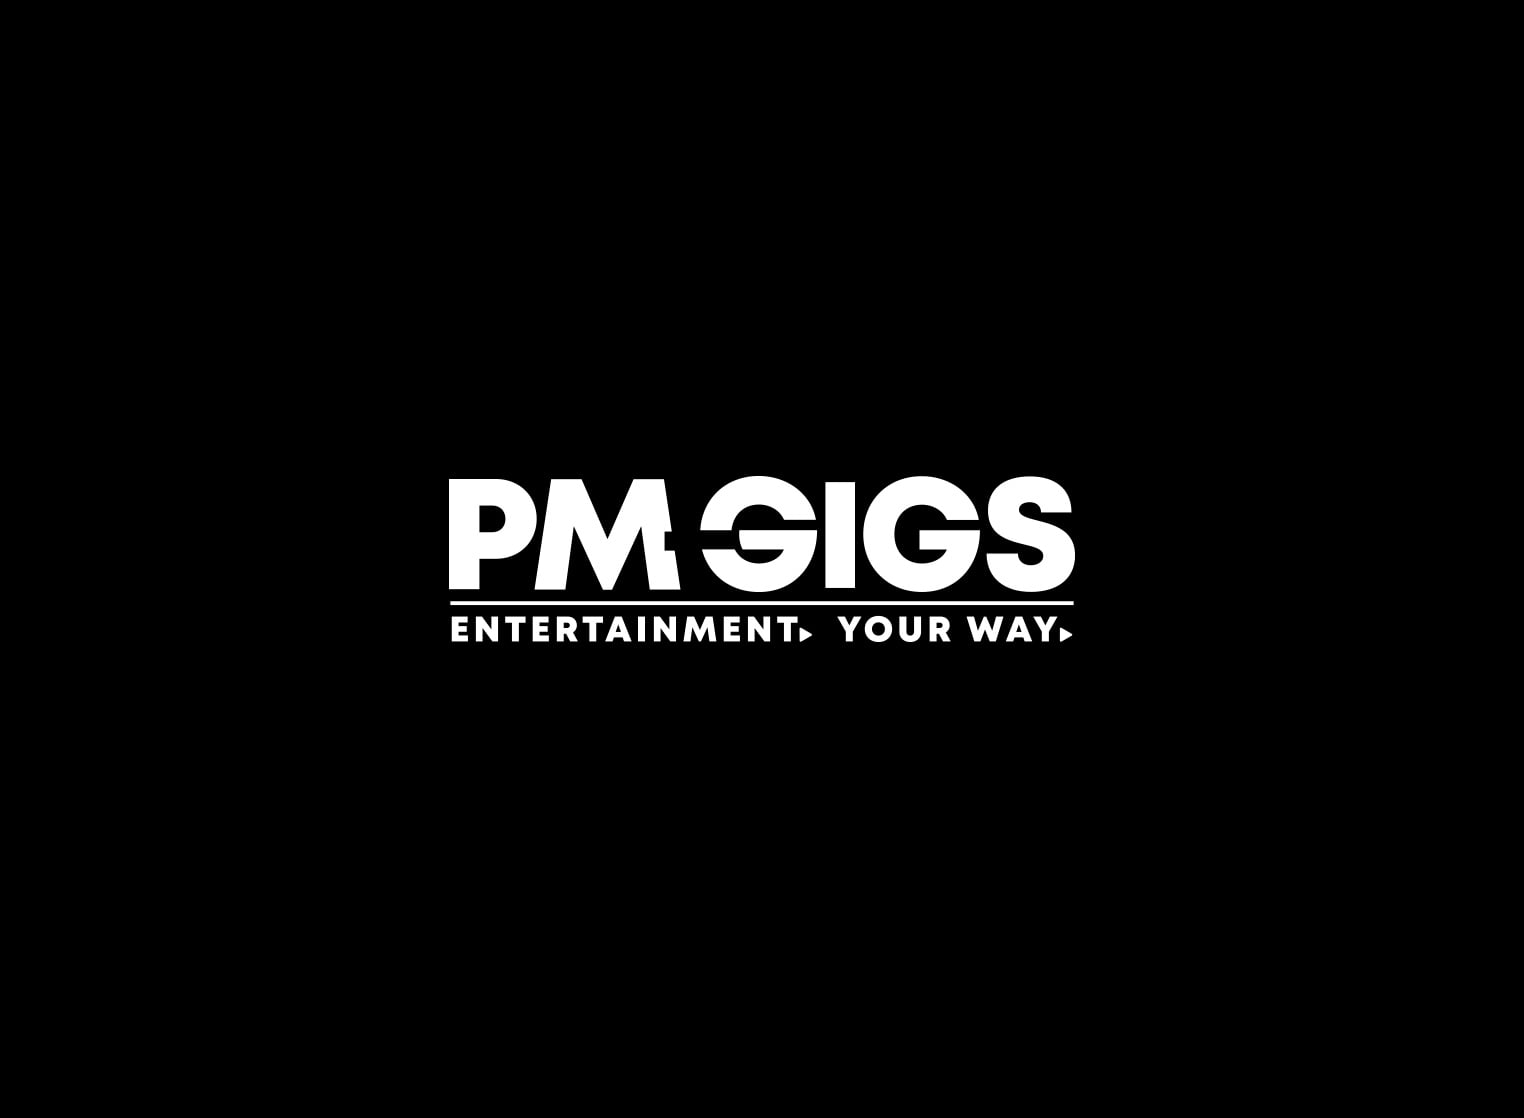 PM Gigs Logo | Creative Elements Consulting